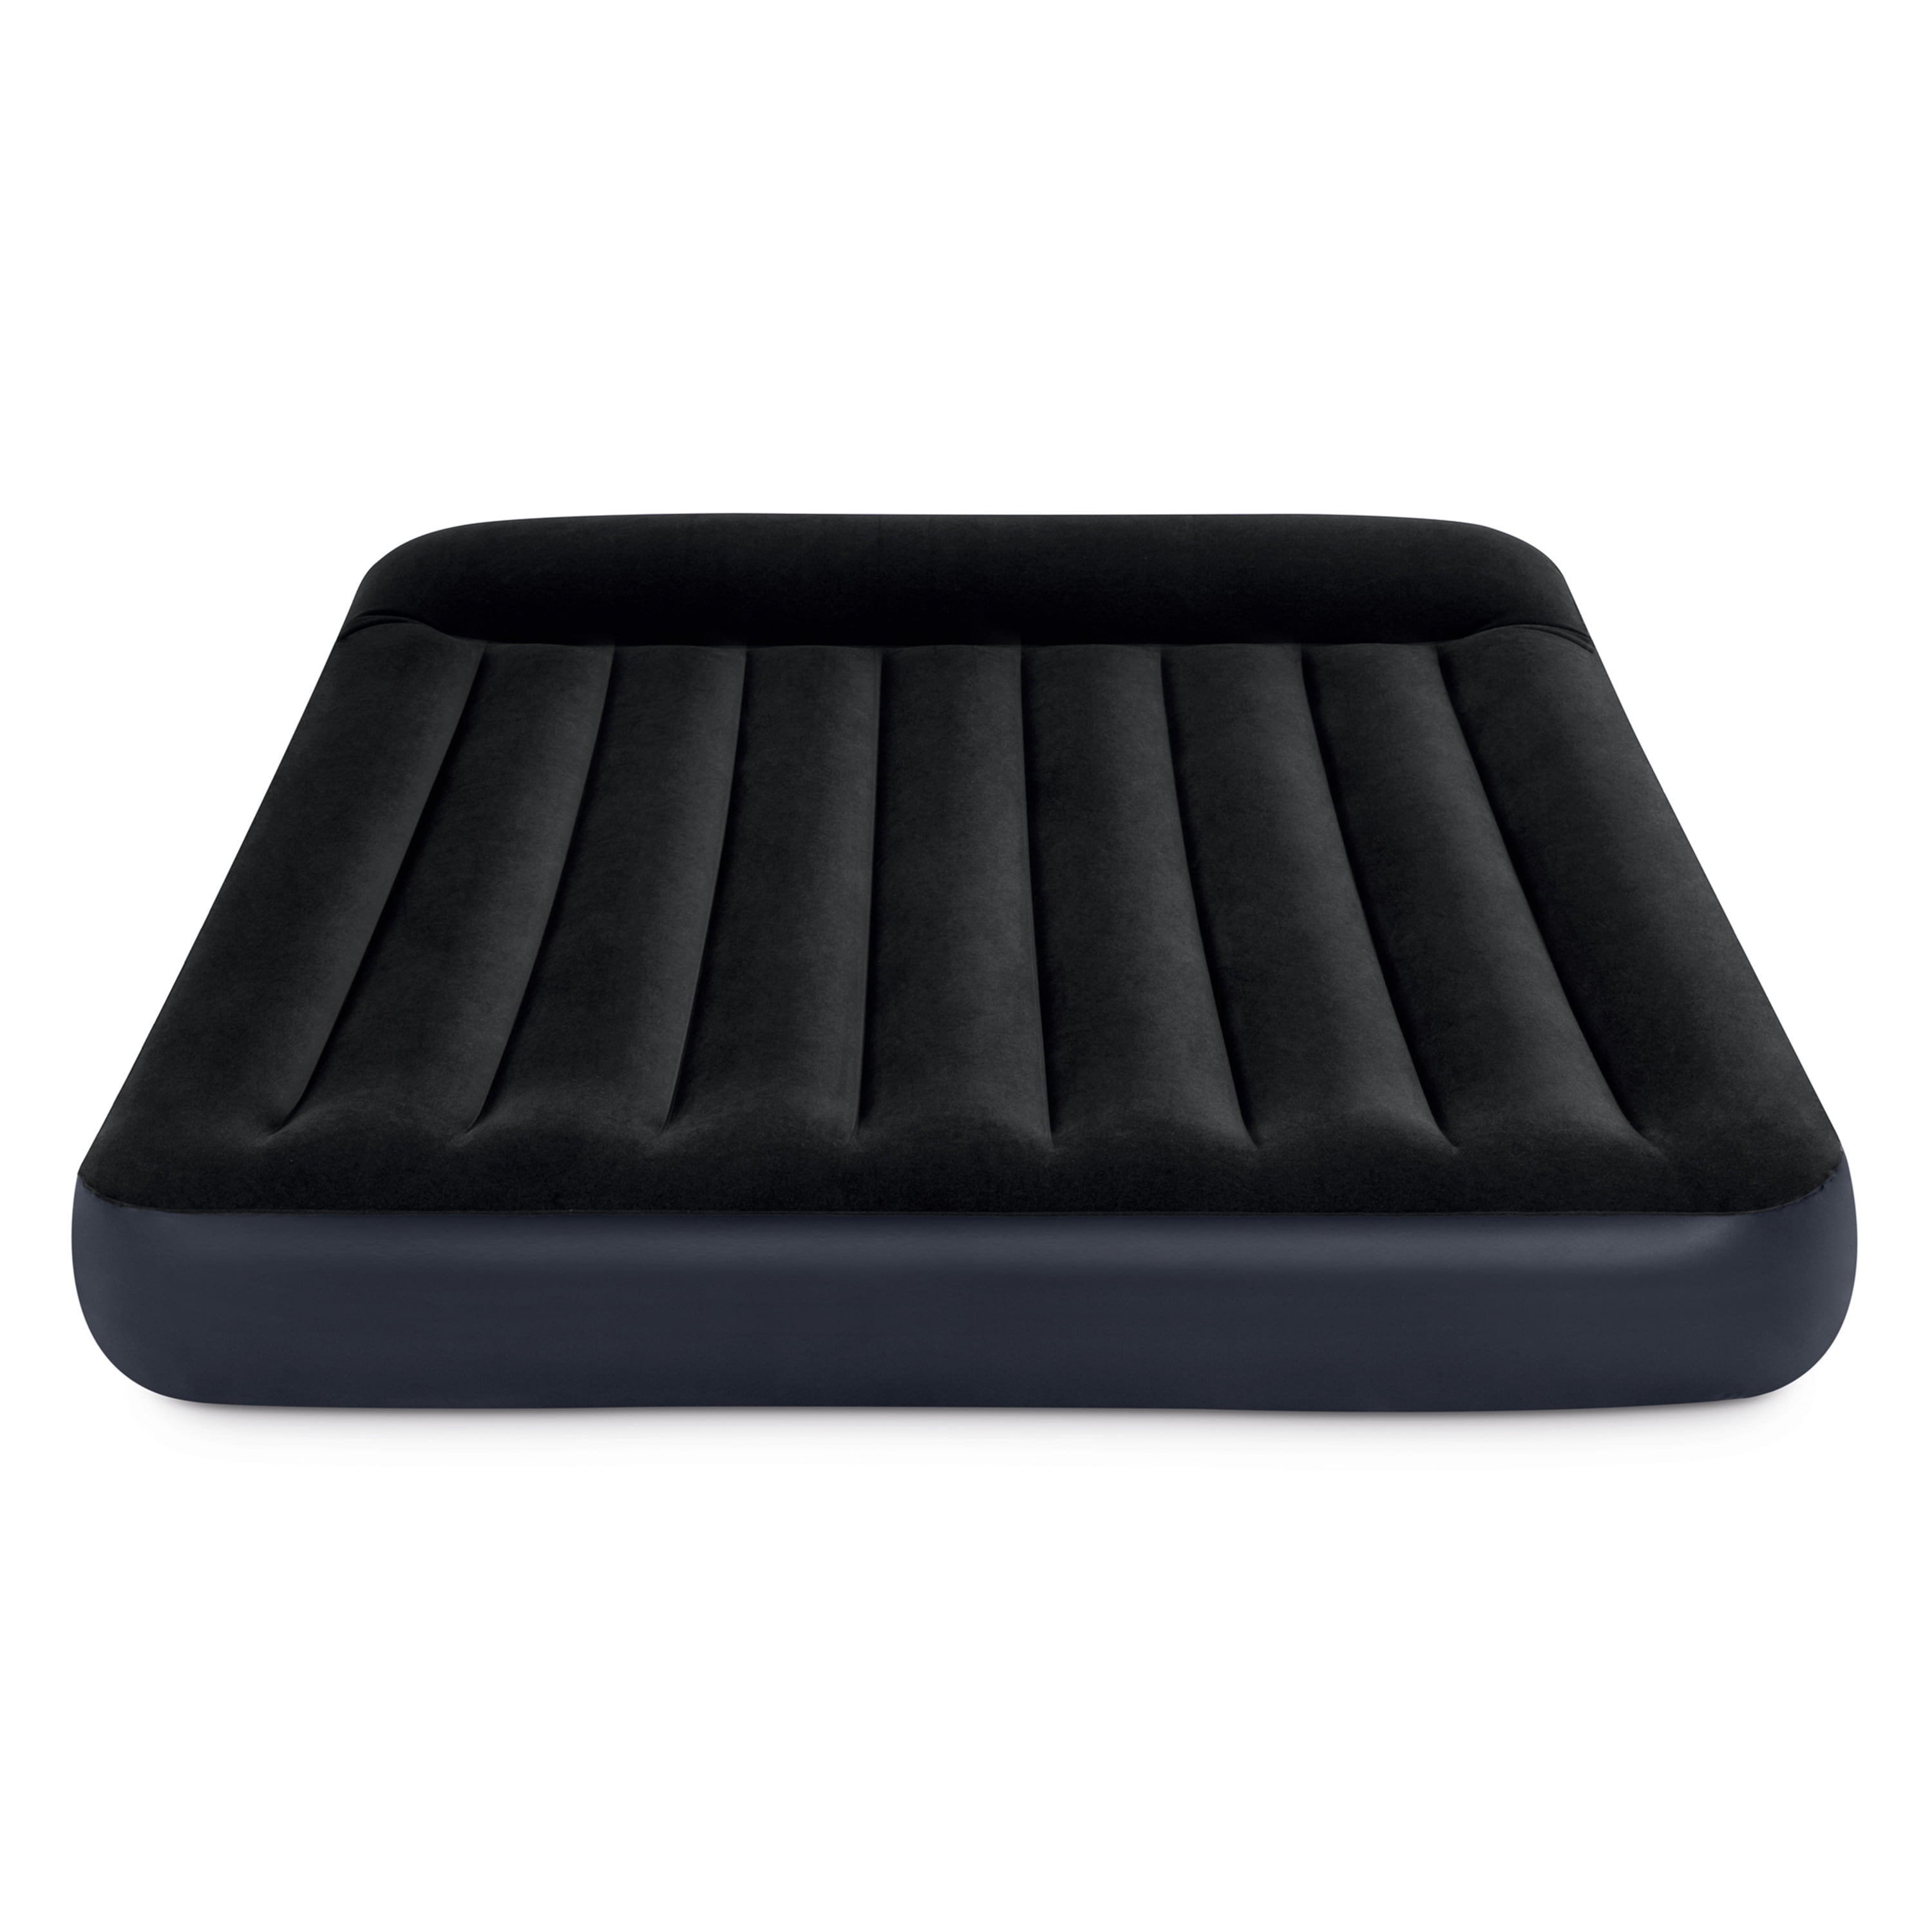 2 Pack Intex Classic Inflatable Full Airbed With Built In Pillow Rest Pump 